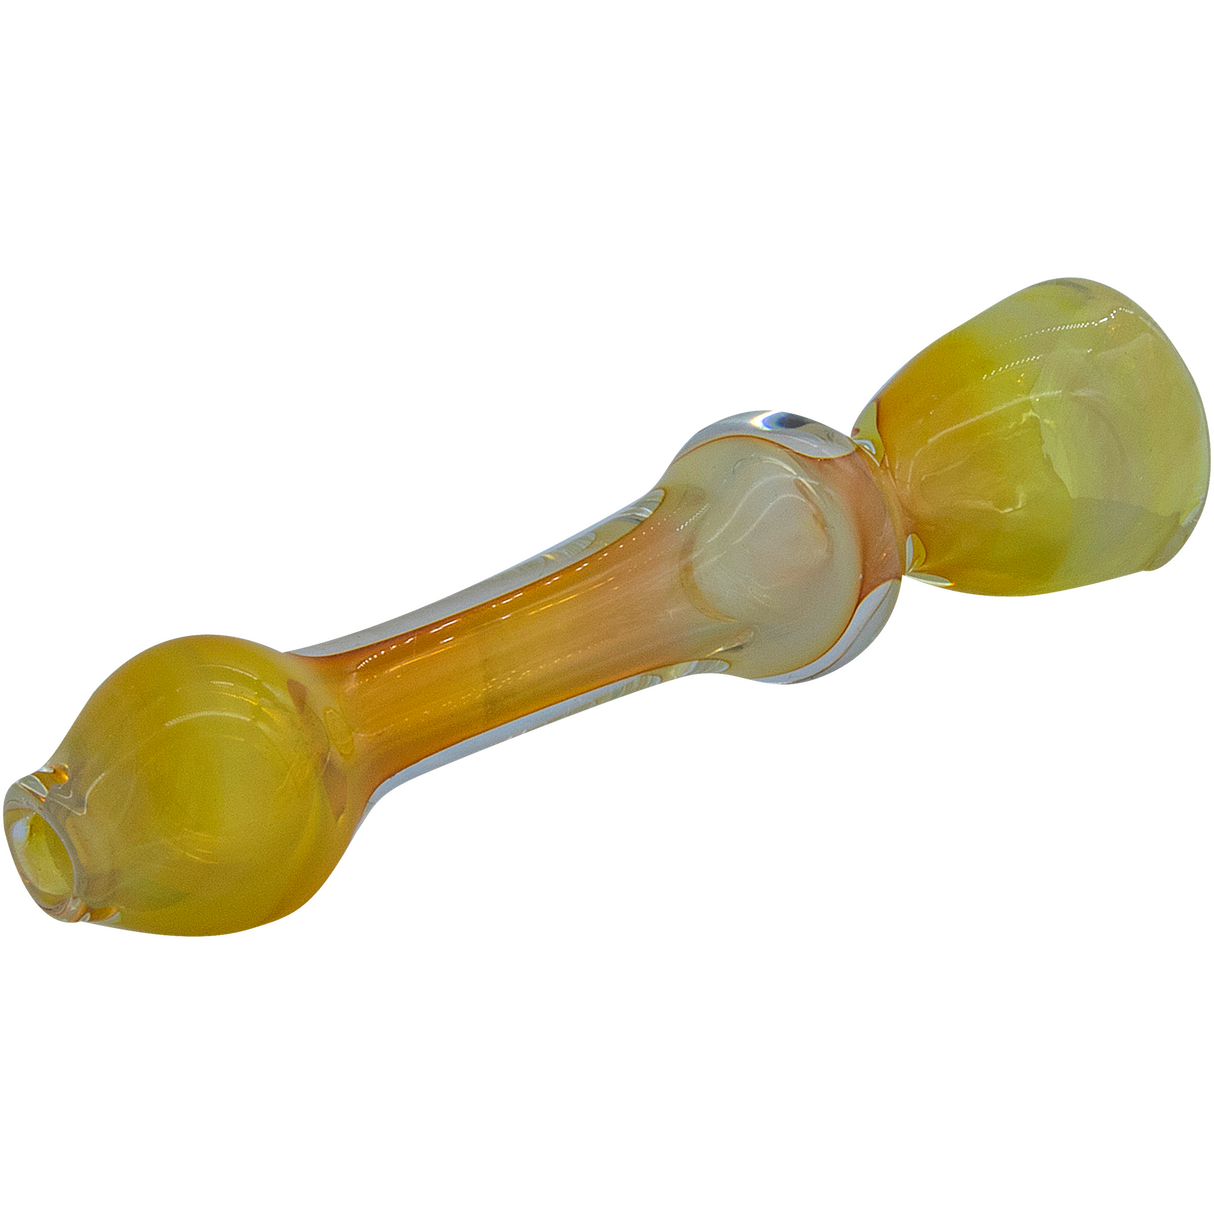 LA Pipes "Chill Fumes" Silver Fumed Chillum for Dry Herbs, 3.5" Borosilicate Glass, USA Made